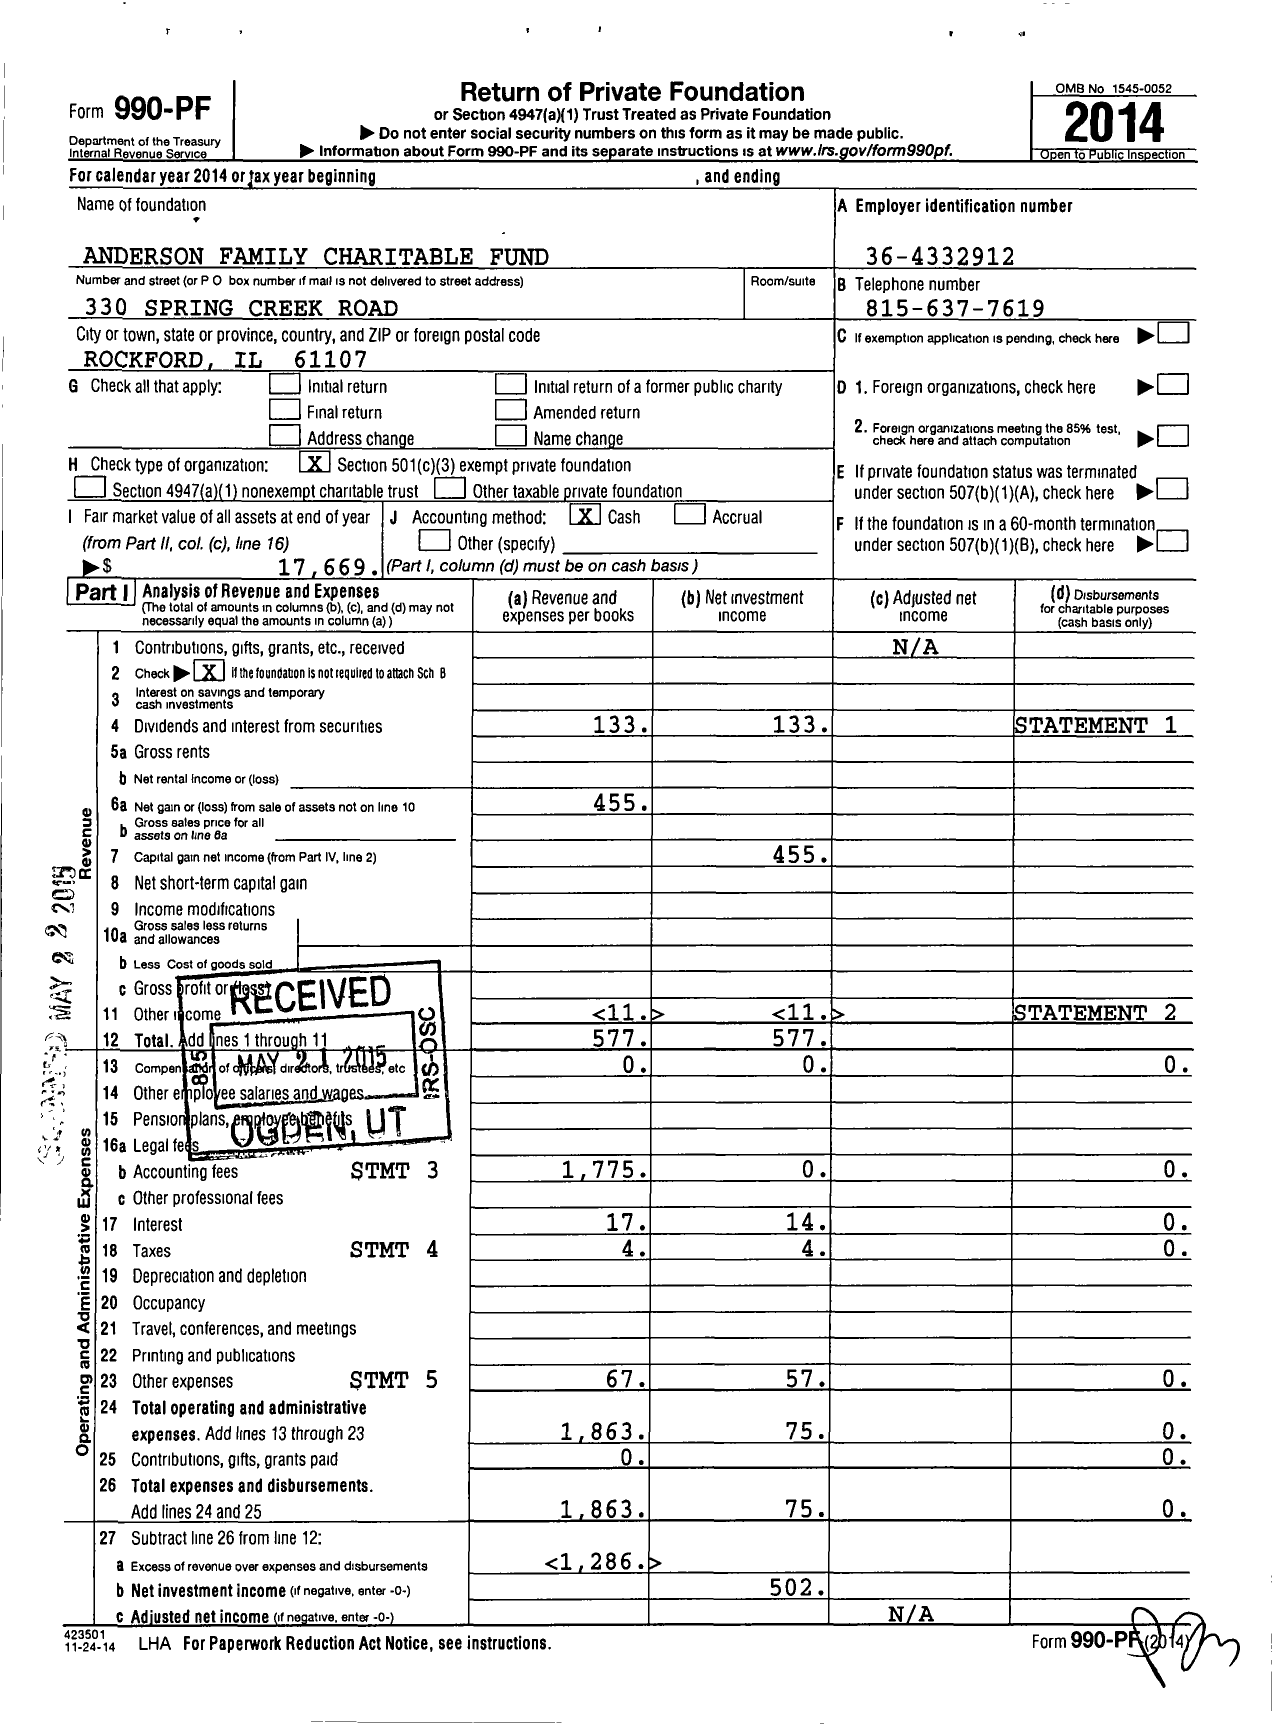 Image of first page of 2014 Form 990PF for Anderson Family Charitable Fund